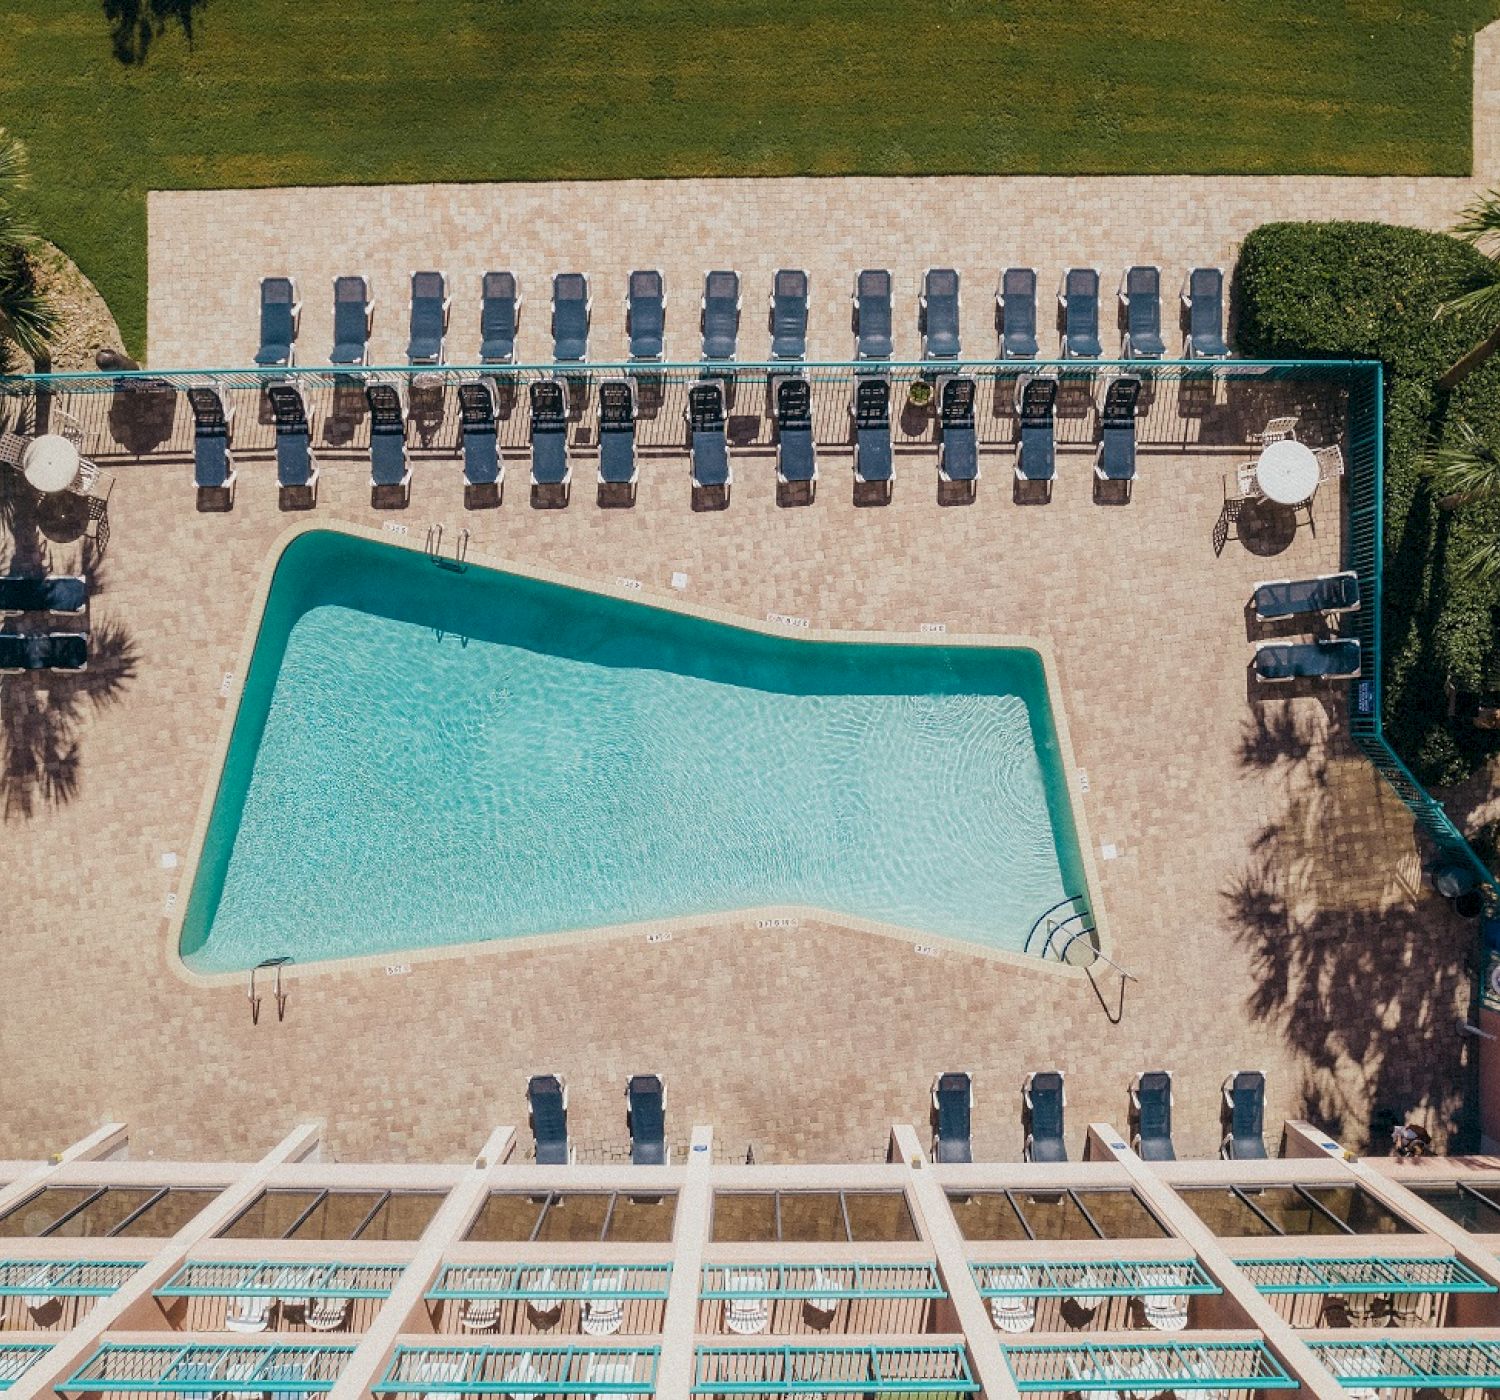 An aerial view of a pool with blue lounge chairs surrounding it, set within a landscaped area with green grass and palm trees.